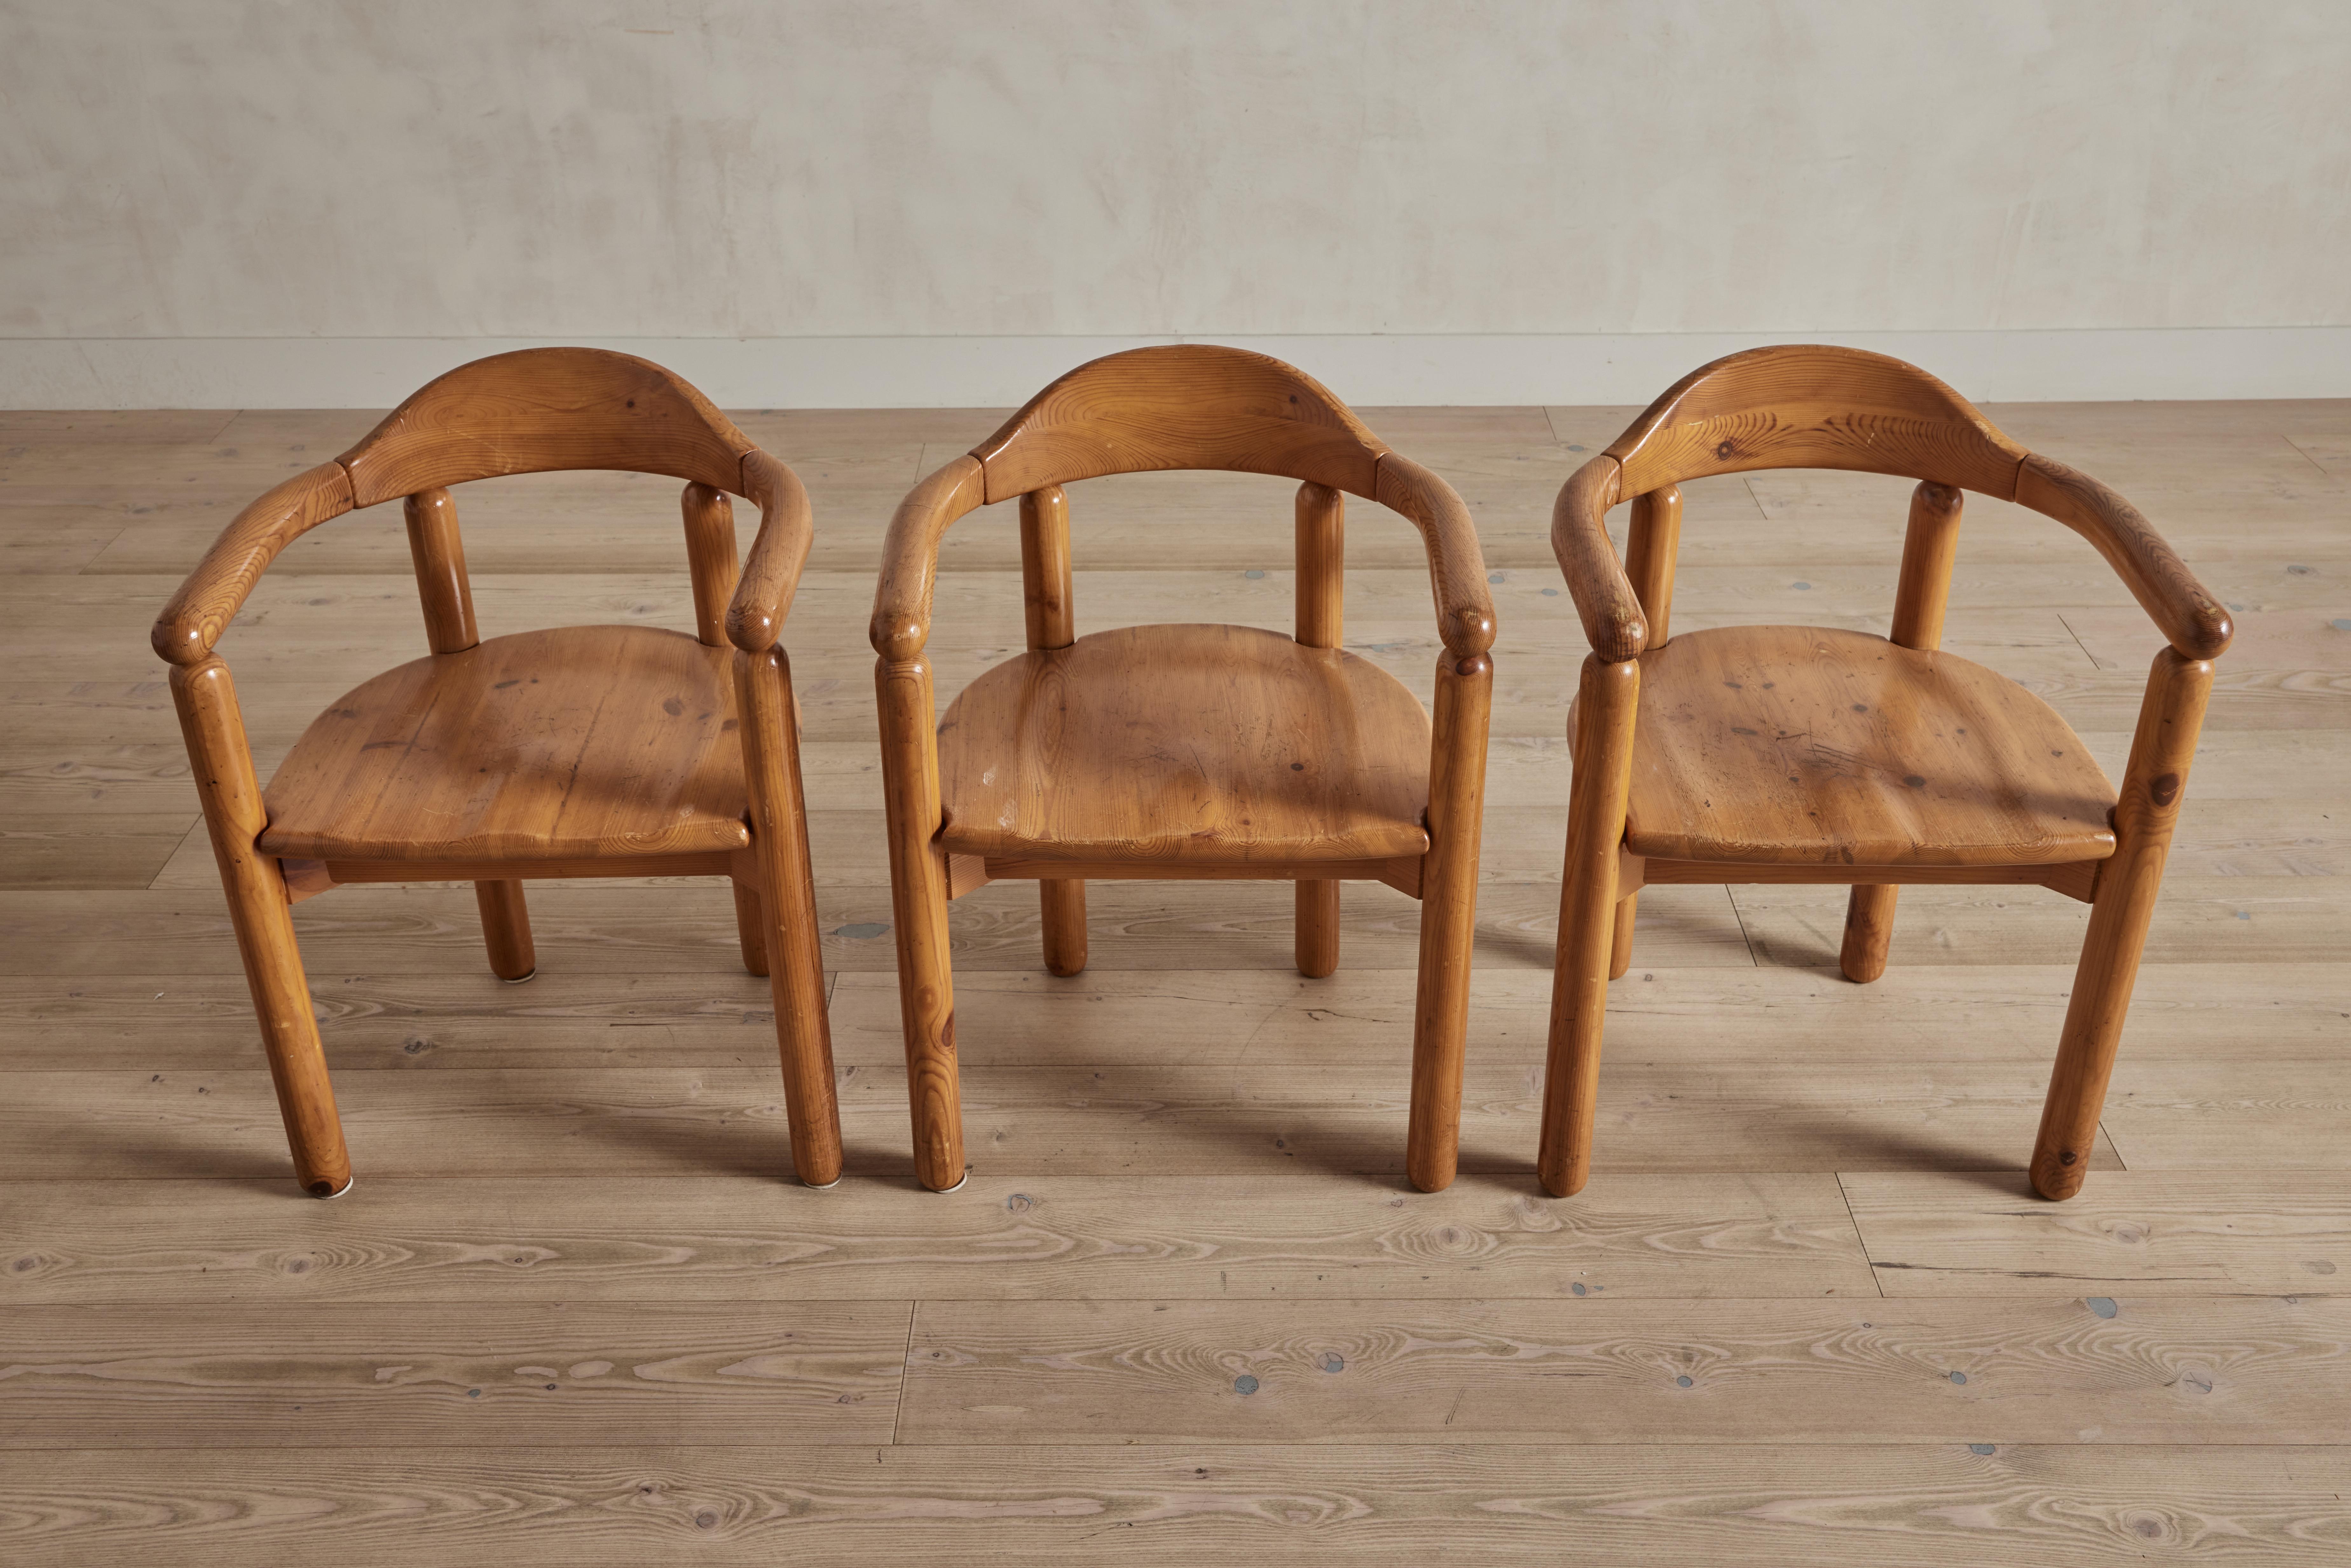 Set of 6 Rainer Daumiller pine wood dining chairs with armrests. Made in Denmark circa 1970. Some visible wear on wood that is consistent with age and use.